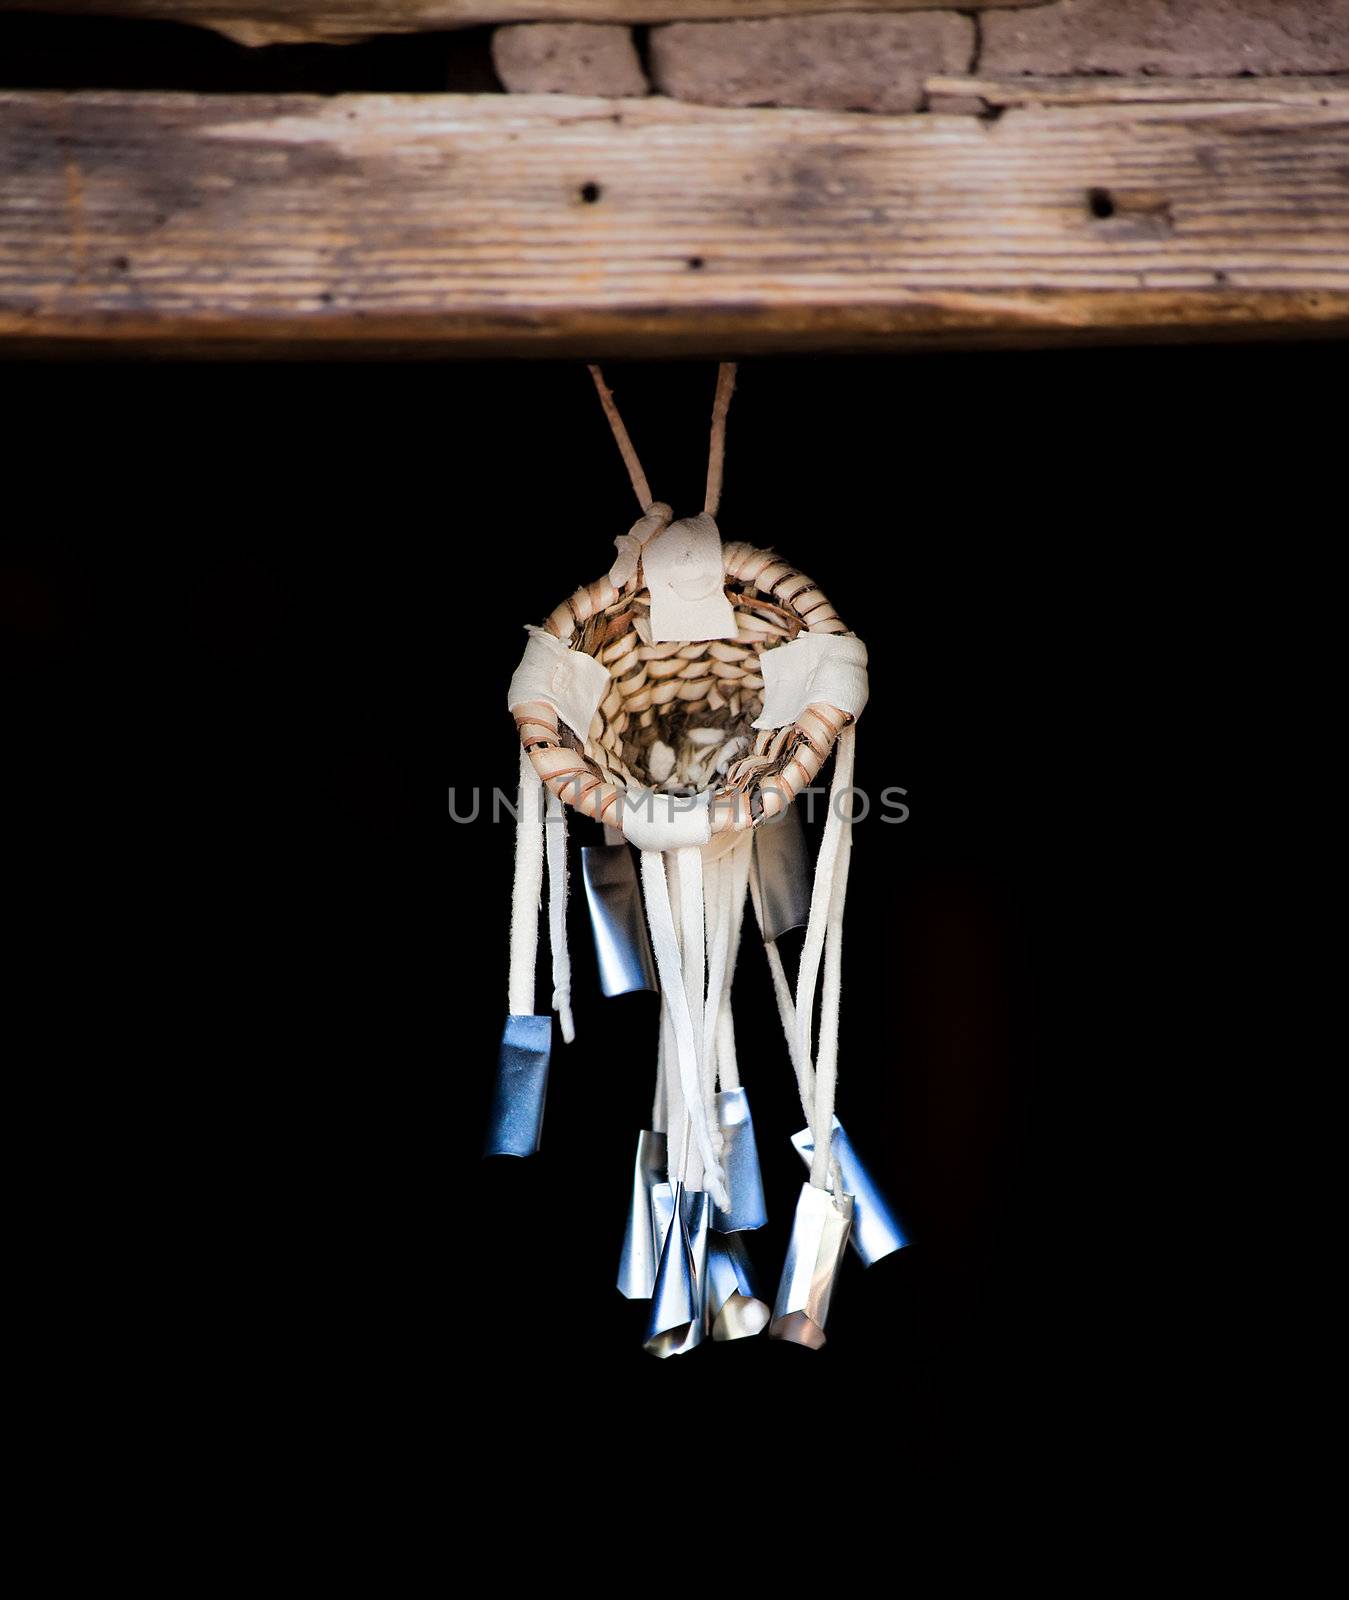 Native American Dream Catcher Suspended from Wooden Beam